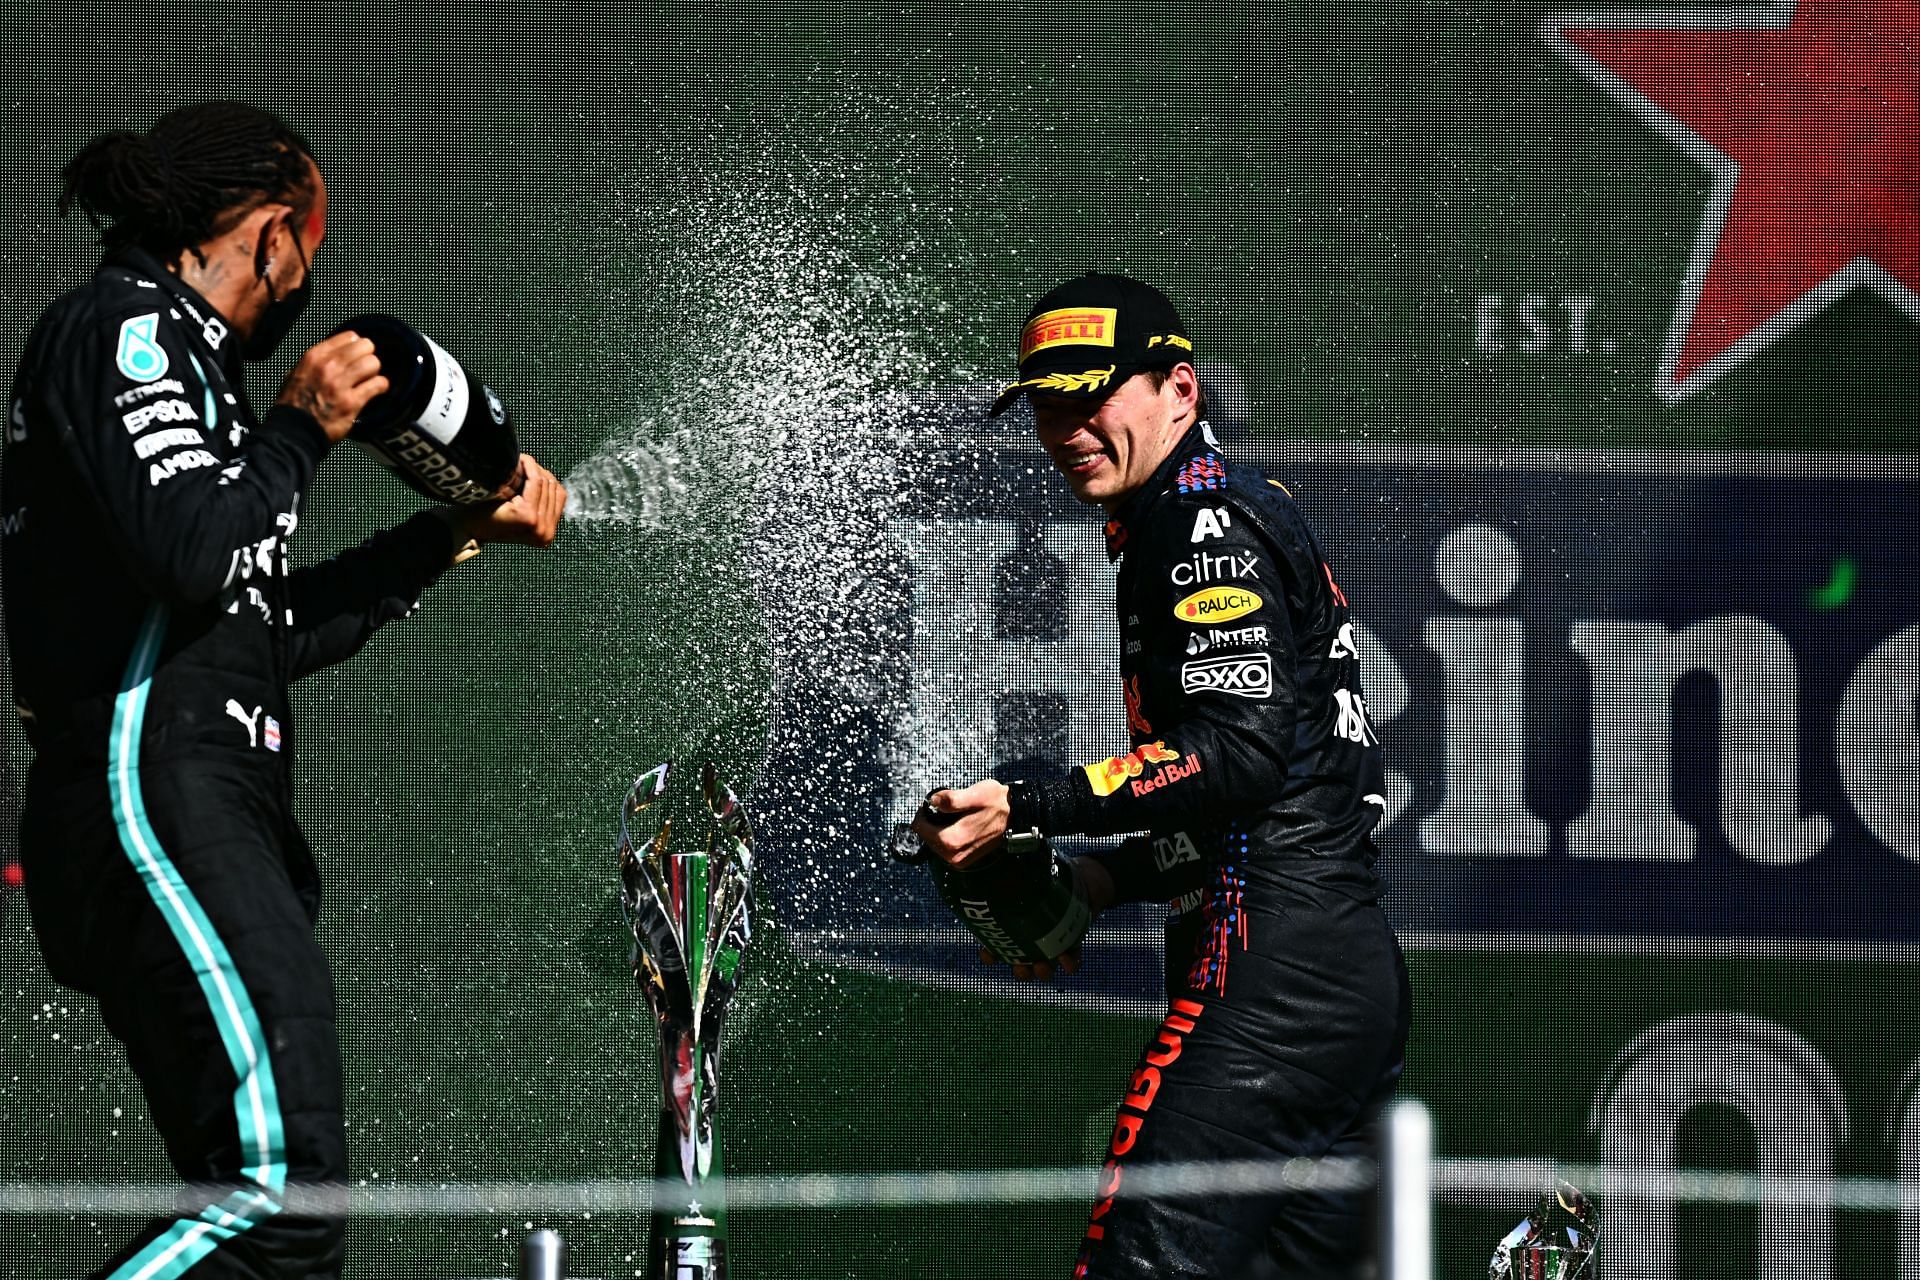 Lewis Hamilton and Max Verstappen celebrating on the podium. (Photo by Clive Mason/Getty Images)